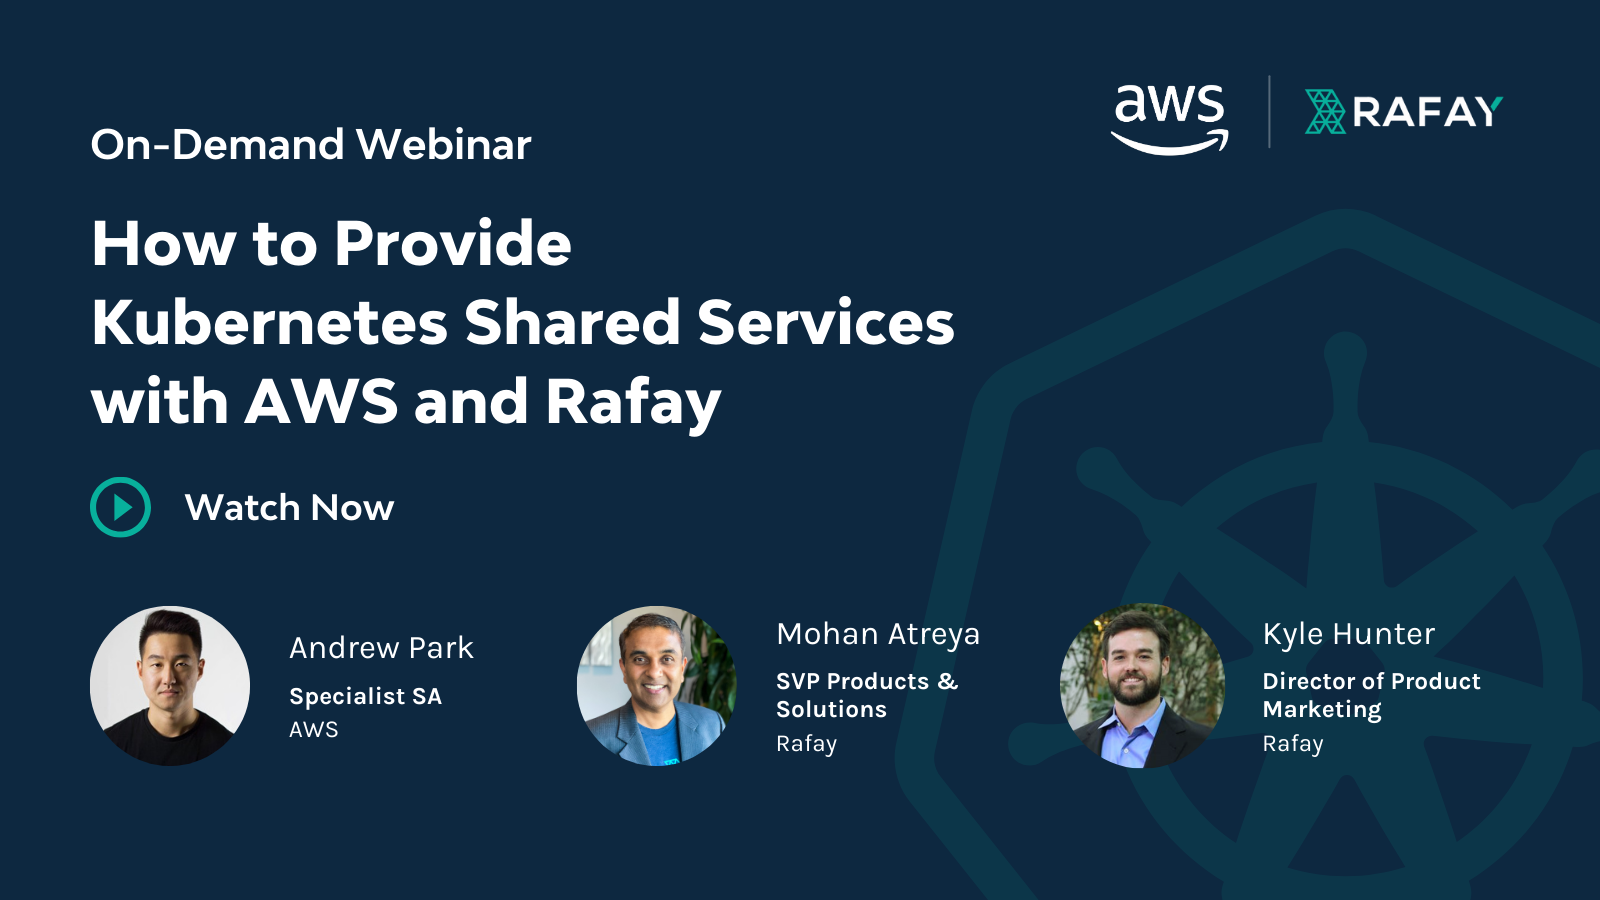 image for How to Provide Kubernetes Shared Services with AWS and Rafay